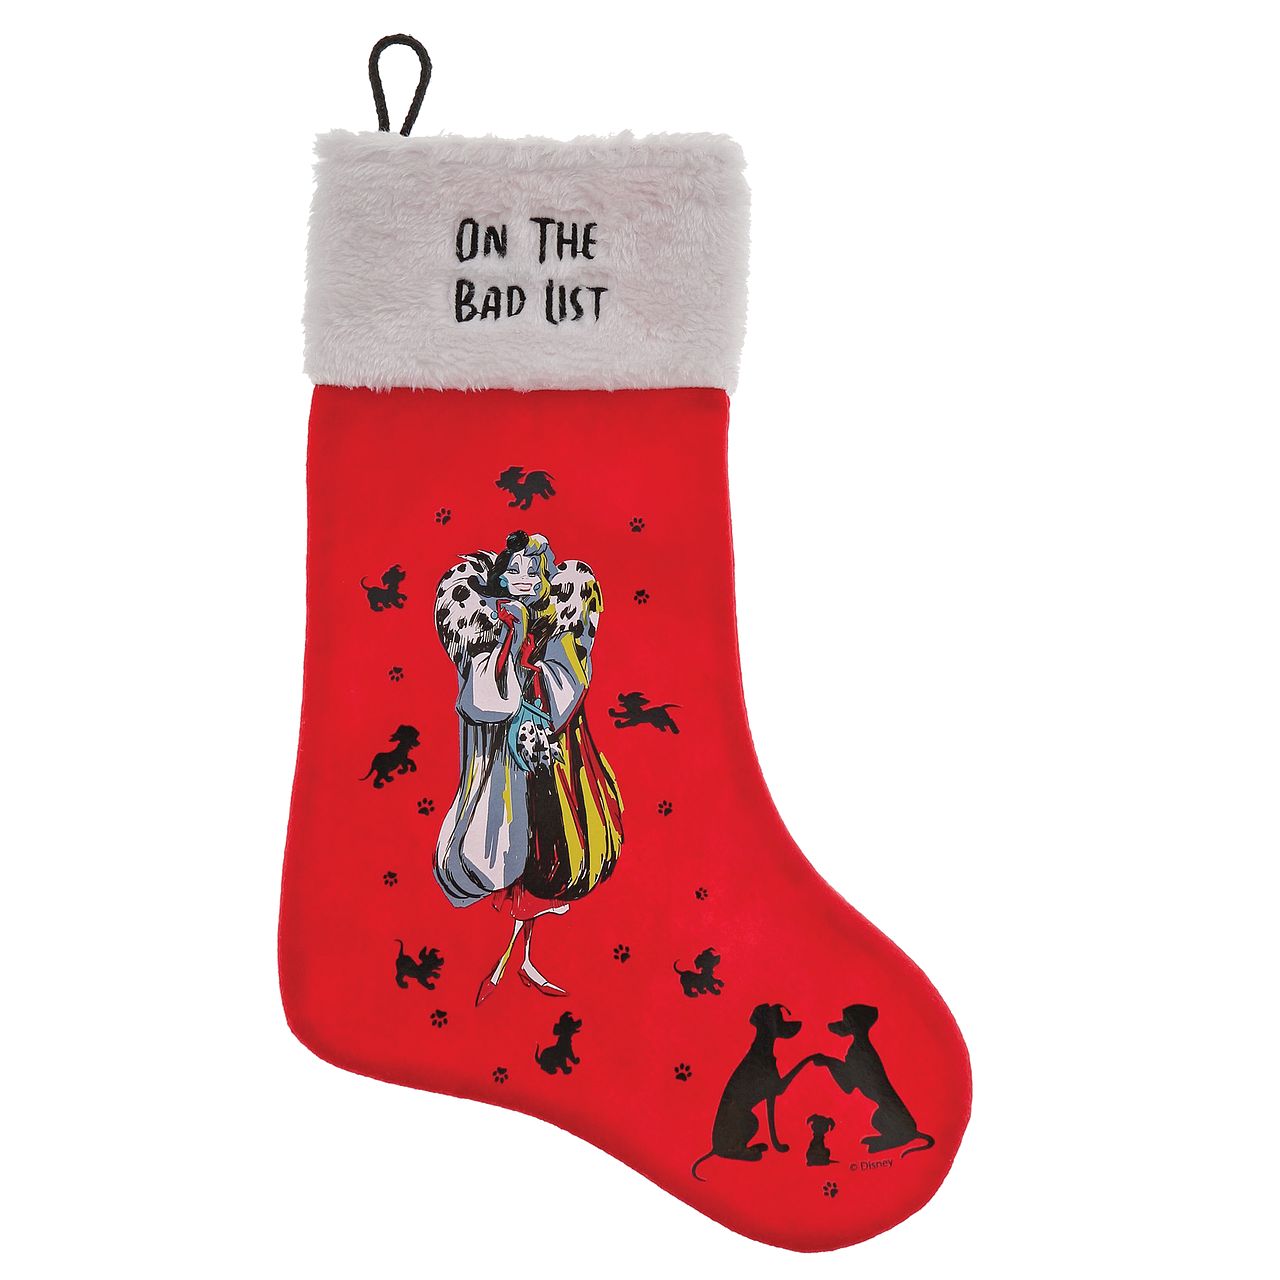 Disney 101 Dalmatians On The Bad List Cruella De Vil Stocking  Do you know anyone on Santa's bad list this year? Cruella De vil from Disney's classic 101 Dalmatians is certainly wicked enough not to make the good list. This unique Christmas stocking will make a great traditional gift, which can be enjoyed year after year.